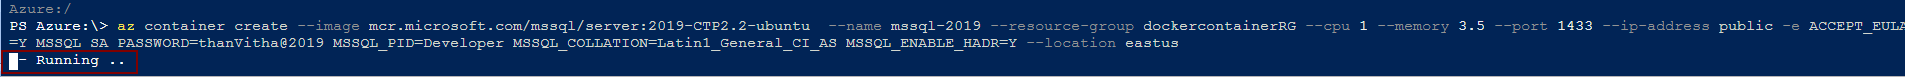 Azure PowerShell module - Az Container create command refering to the status- Running